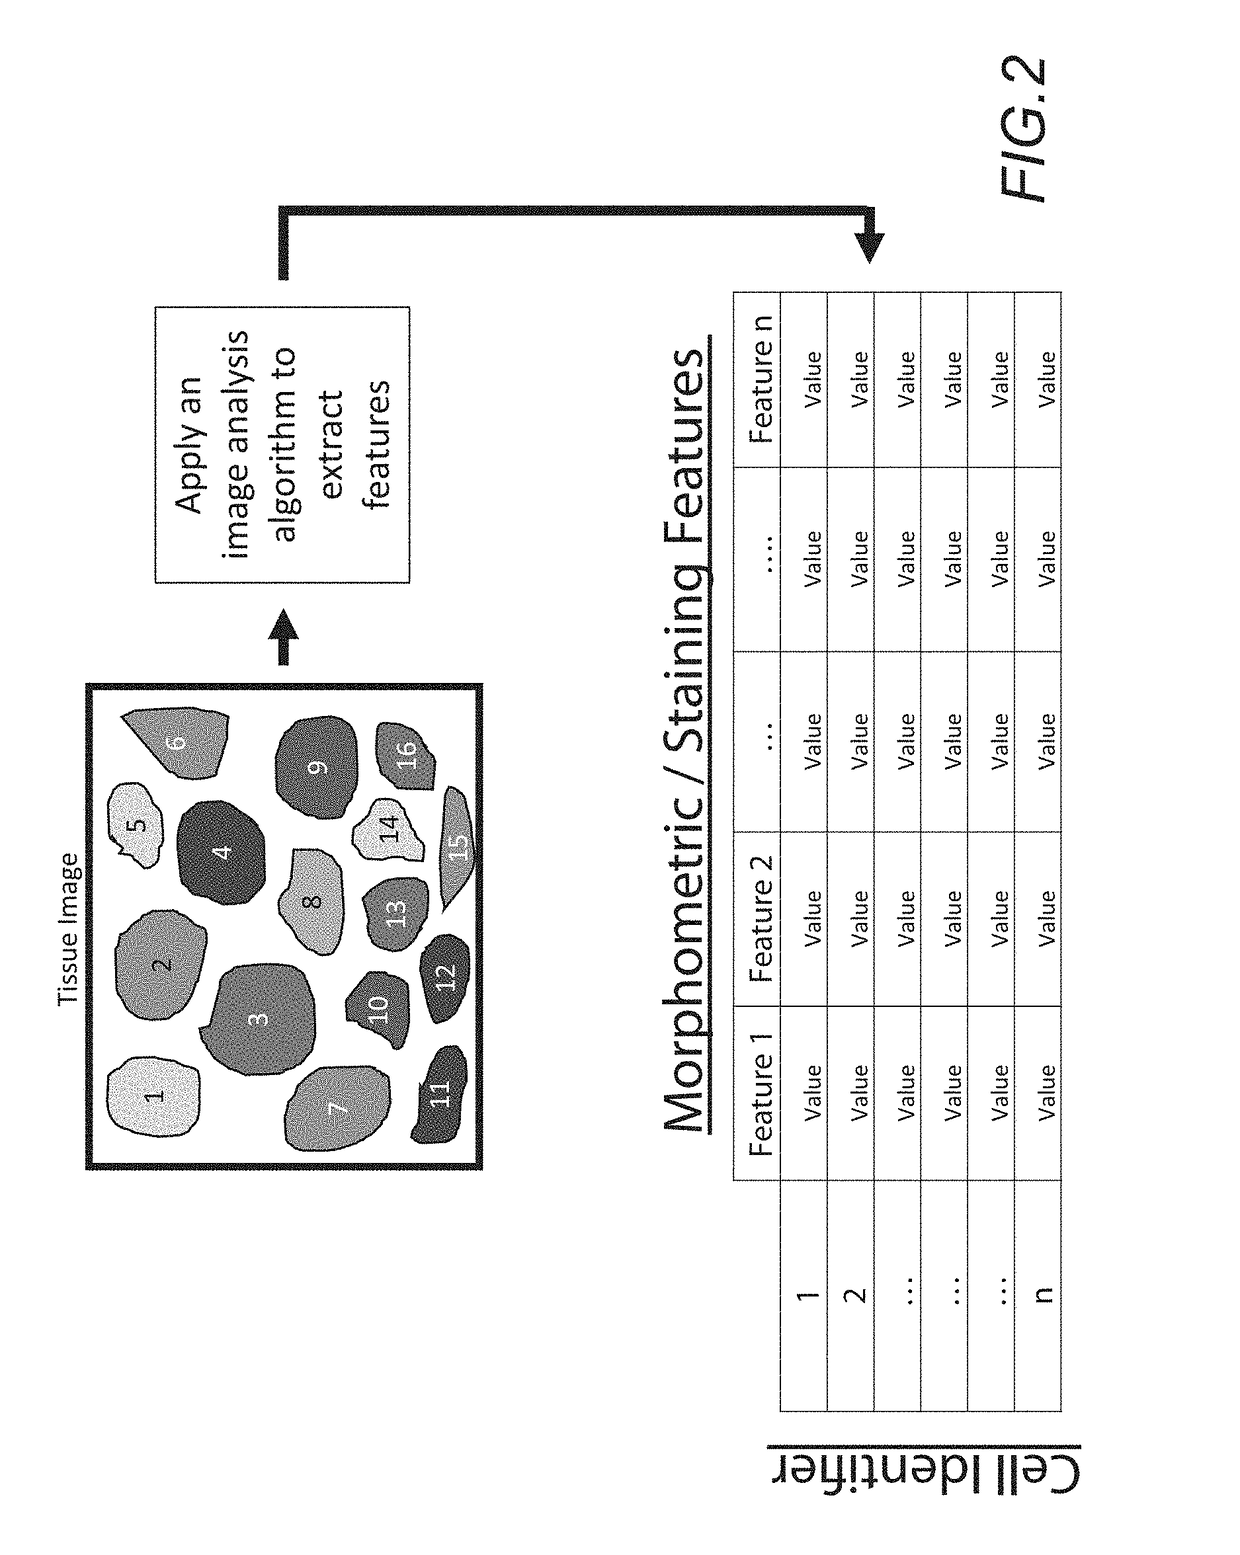 Method for stratifying and selecting candidates for receiving a specific therapeutic approach